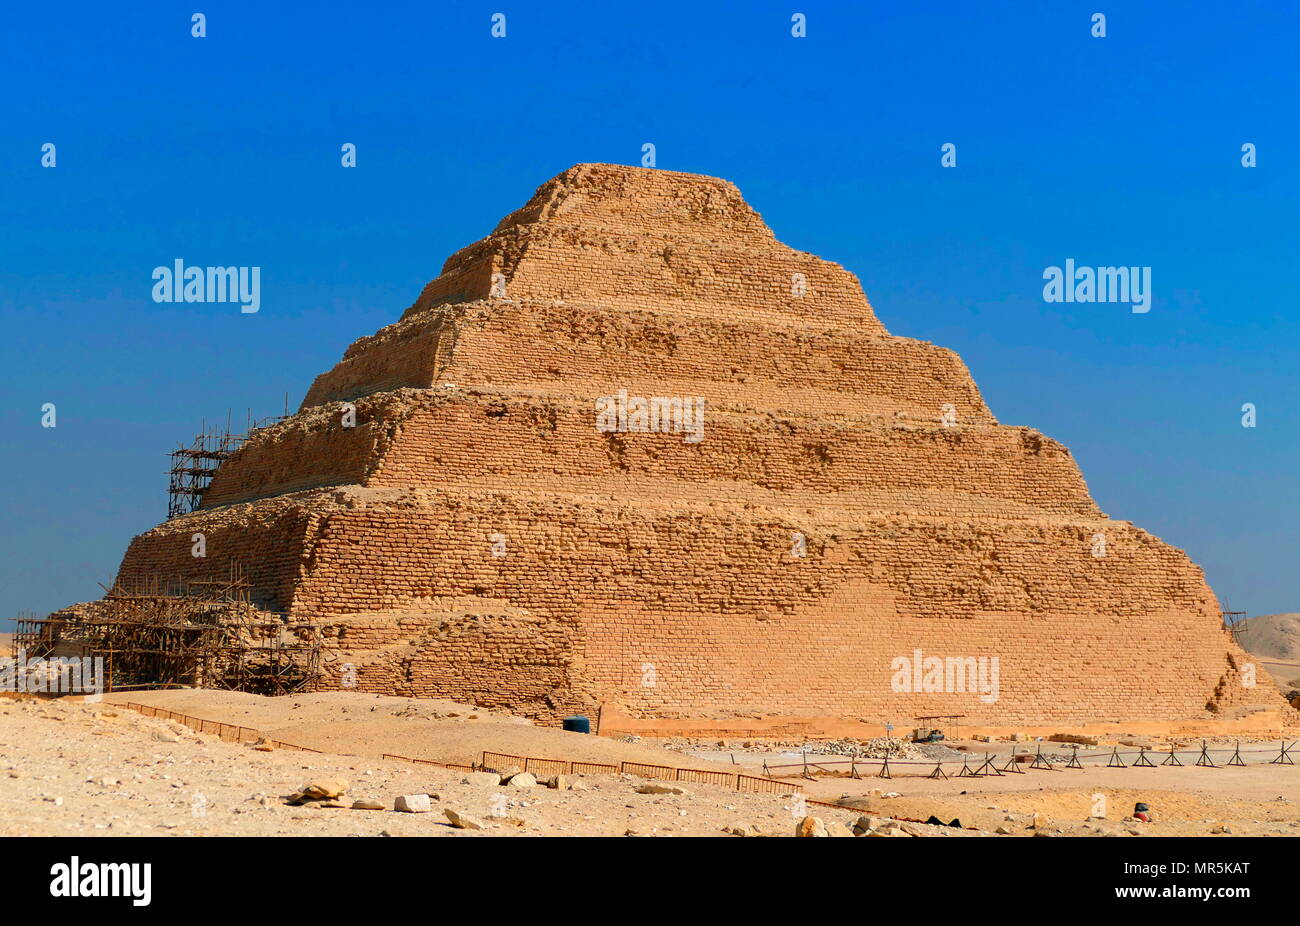 Step Pyramid of Djoser, at Saqqara, Egypt. Saqqara was an ancient burial ground in Egypt, serving as the necropolis for the Ancient Egyptian capital, Memphis. Djoser was the first or second king of the 3rd Dynasty (ca. 2667 to 2648 BC) of the Egyptian Old Kingdom (ca. 2686 to 2125 BC) Stock Photo